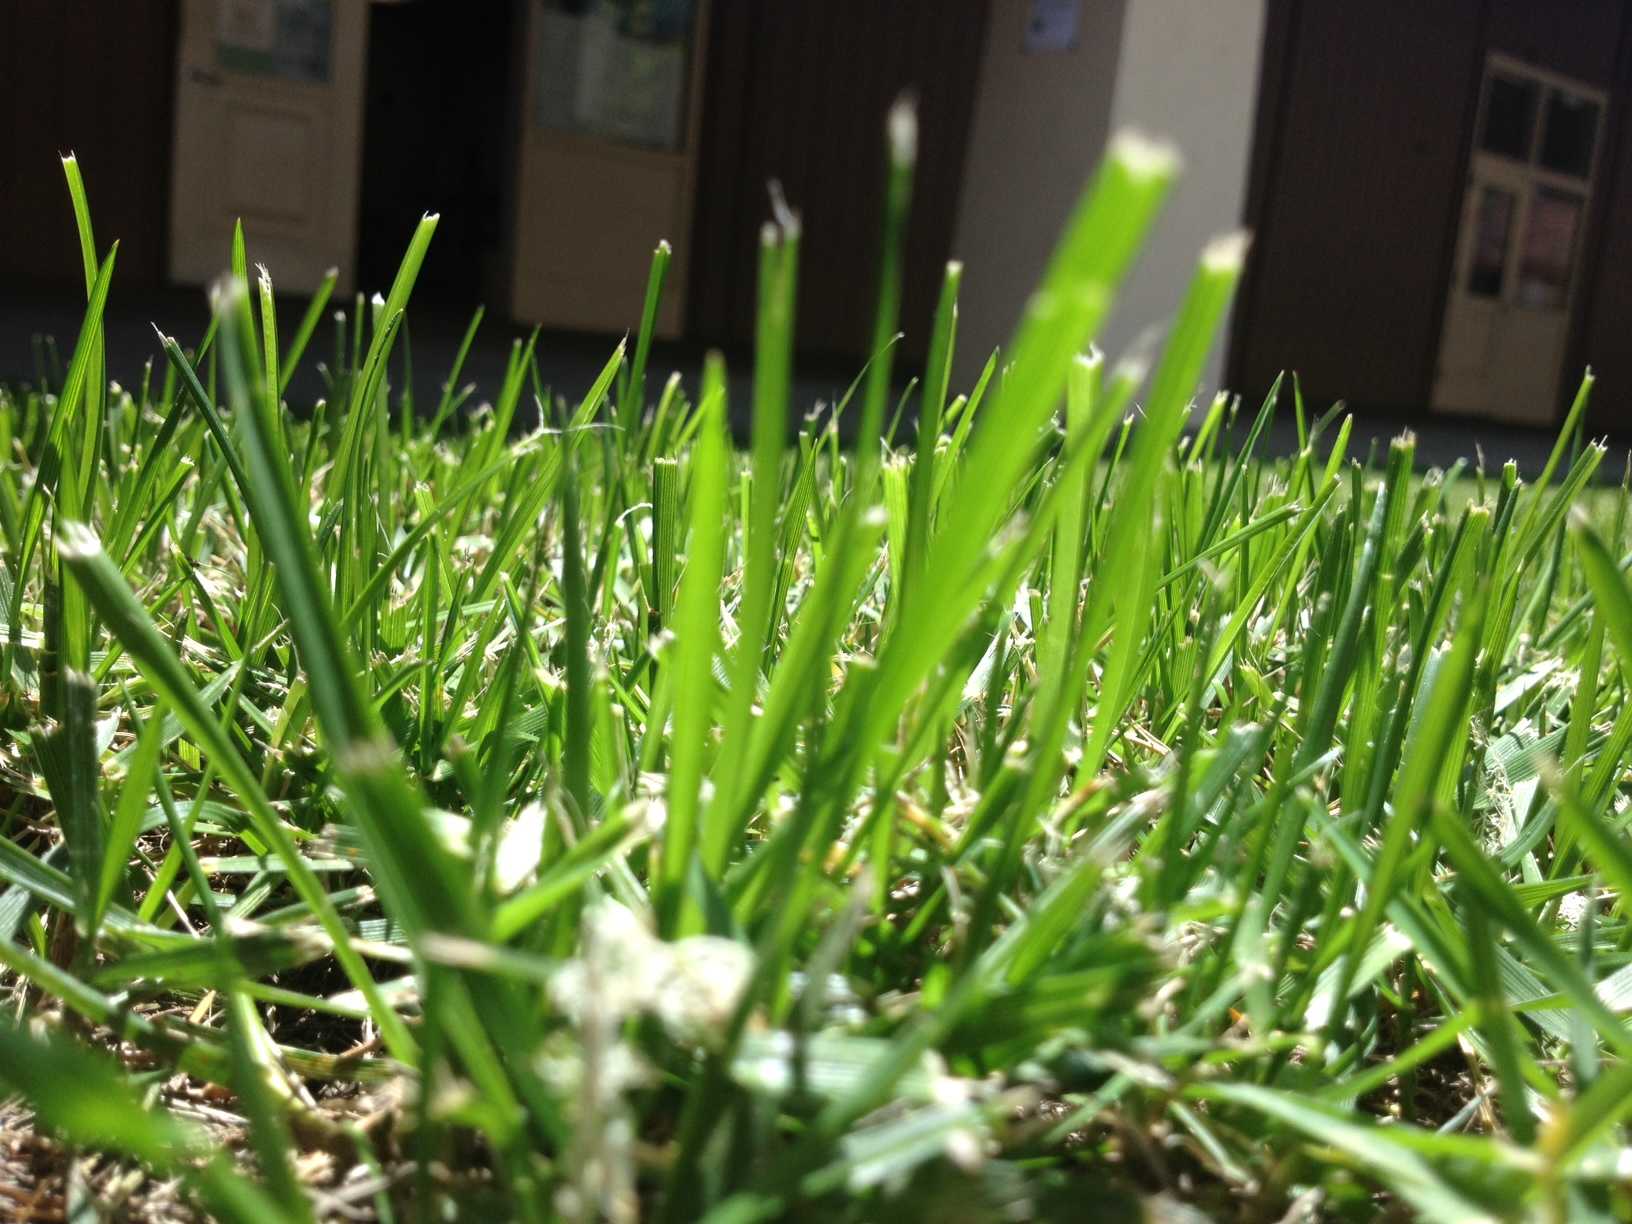 Ornamental uses of water such as lawns will be most affected by Palo Alto’s water restrictions. These restrictions come in response the California’s ongoing drought, with 2014 being the warmest and third driest year on record in California, according to California Water Science Center.  